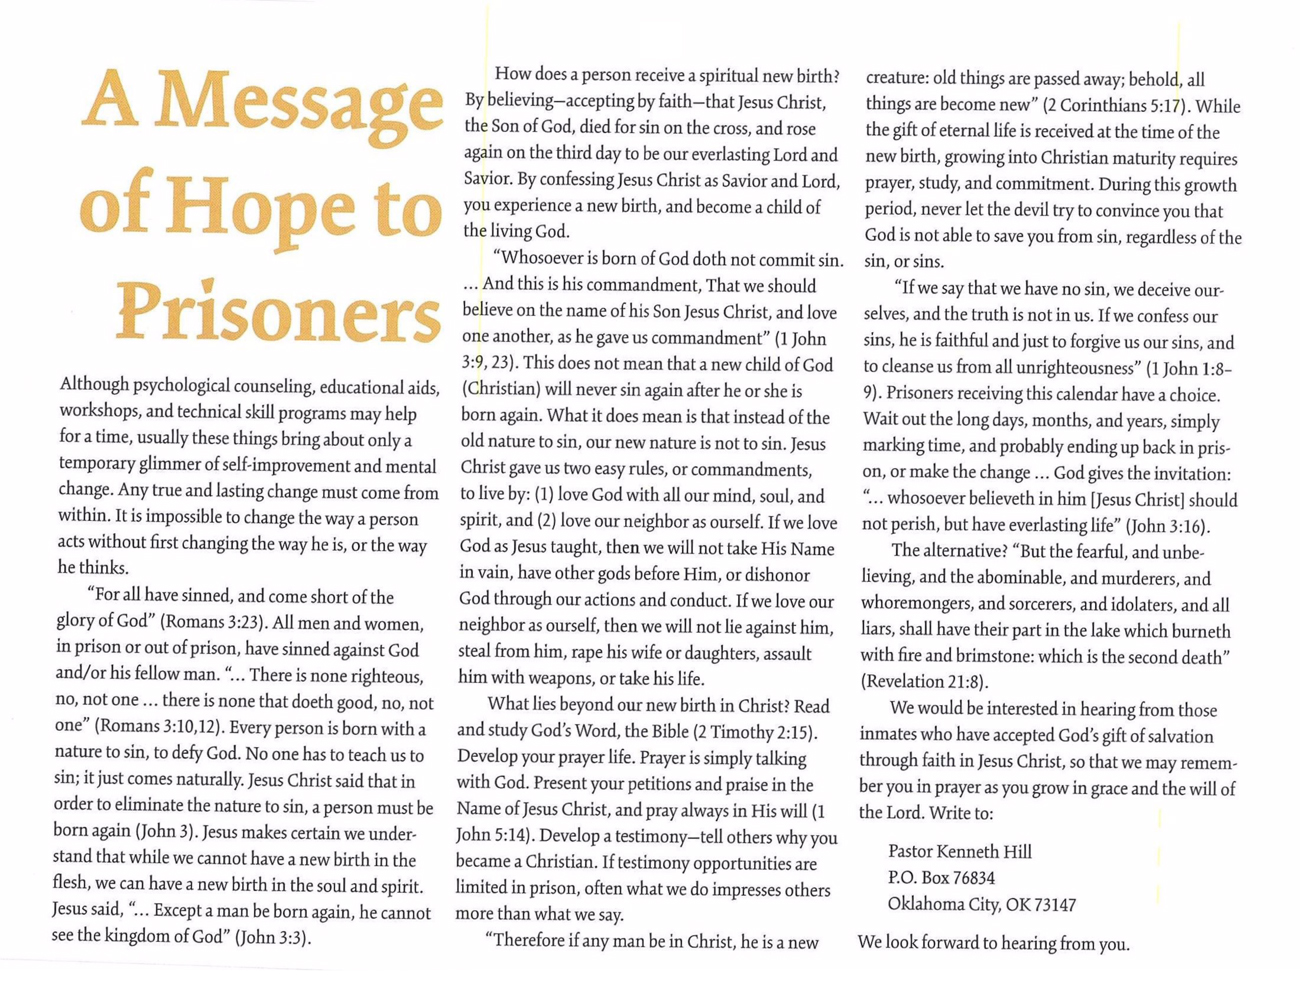 2022 Prophecy Calendar: A Message of Hope to Prisoners